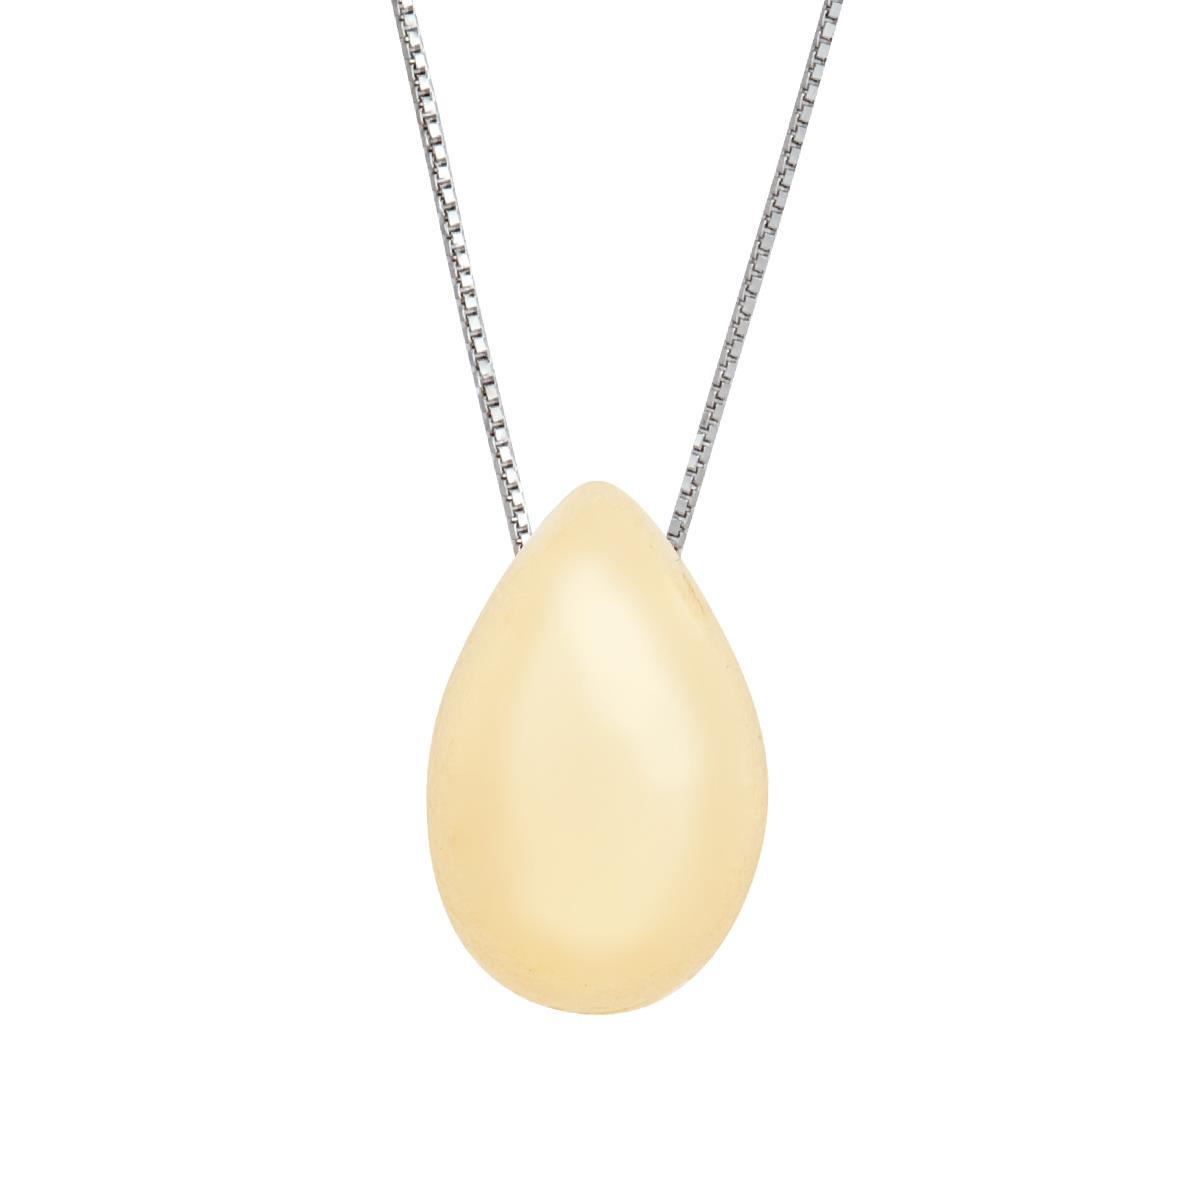 Goccia necklace in 18kt polished yellow gold - CEA2548-LN